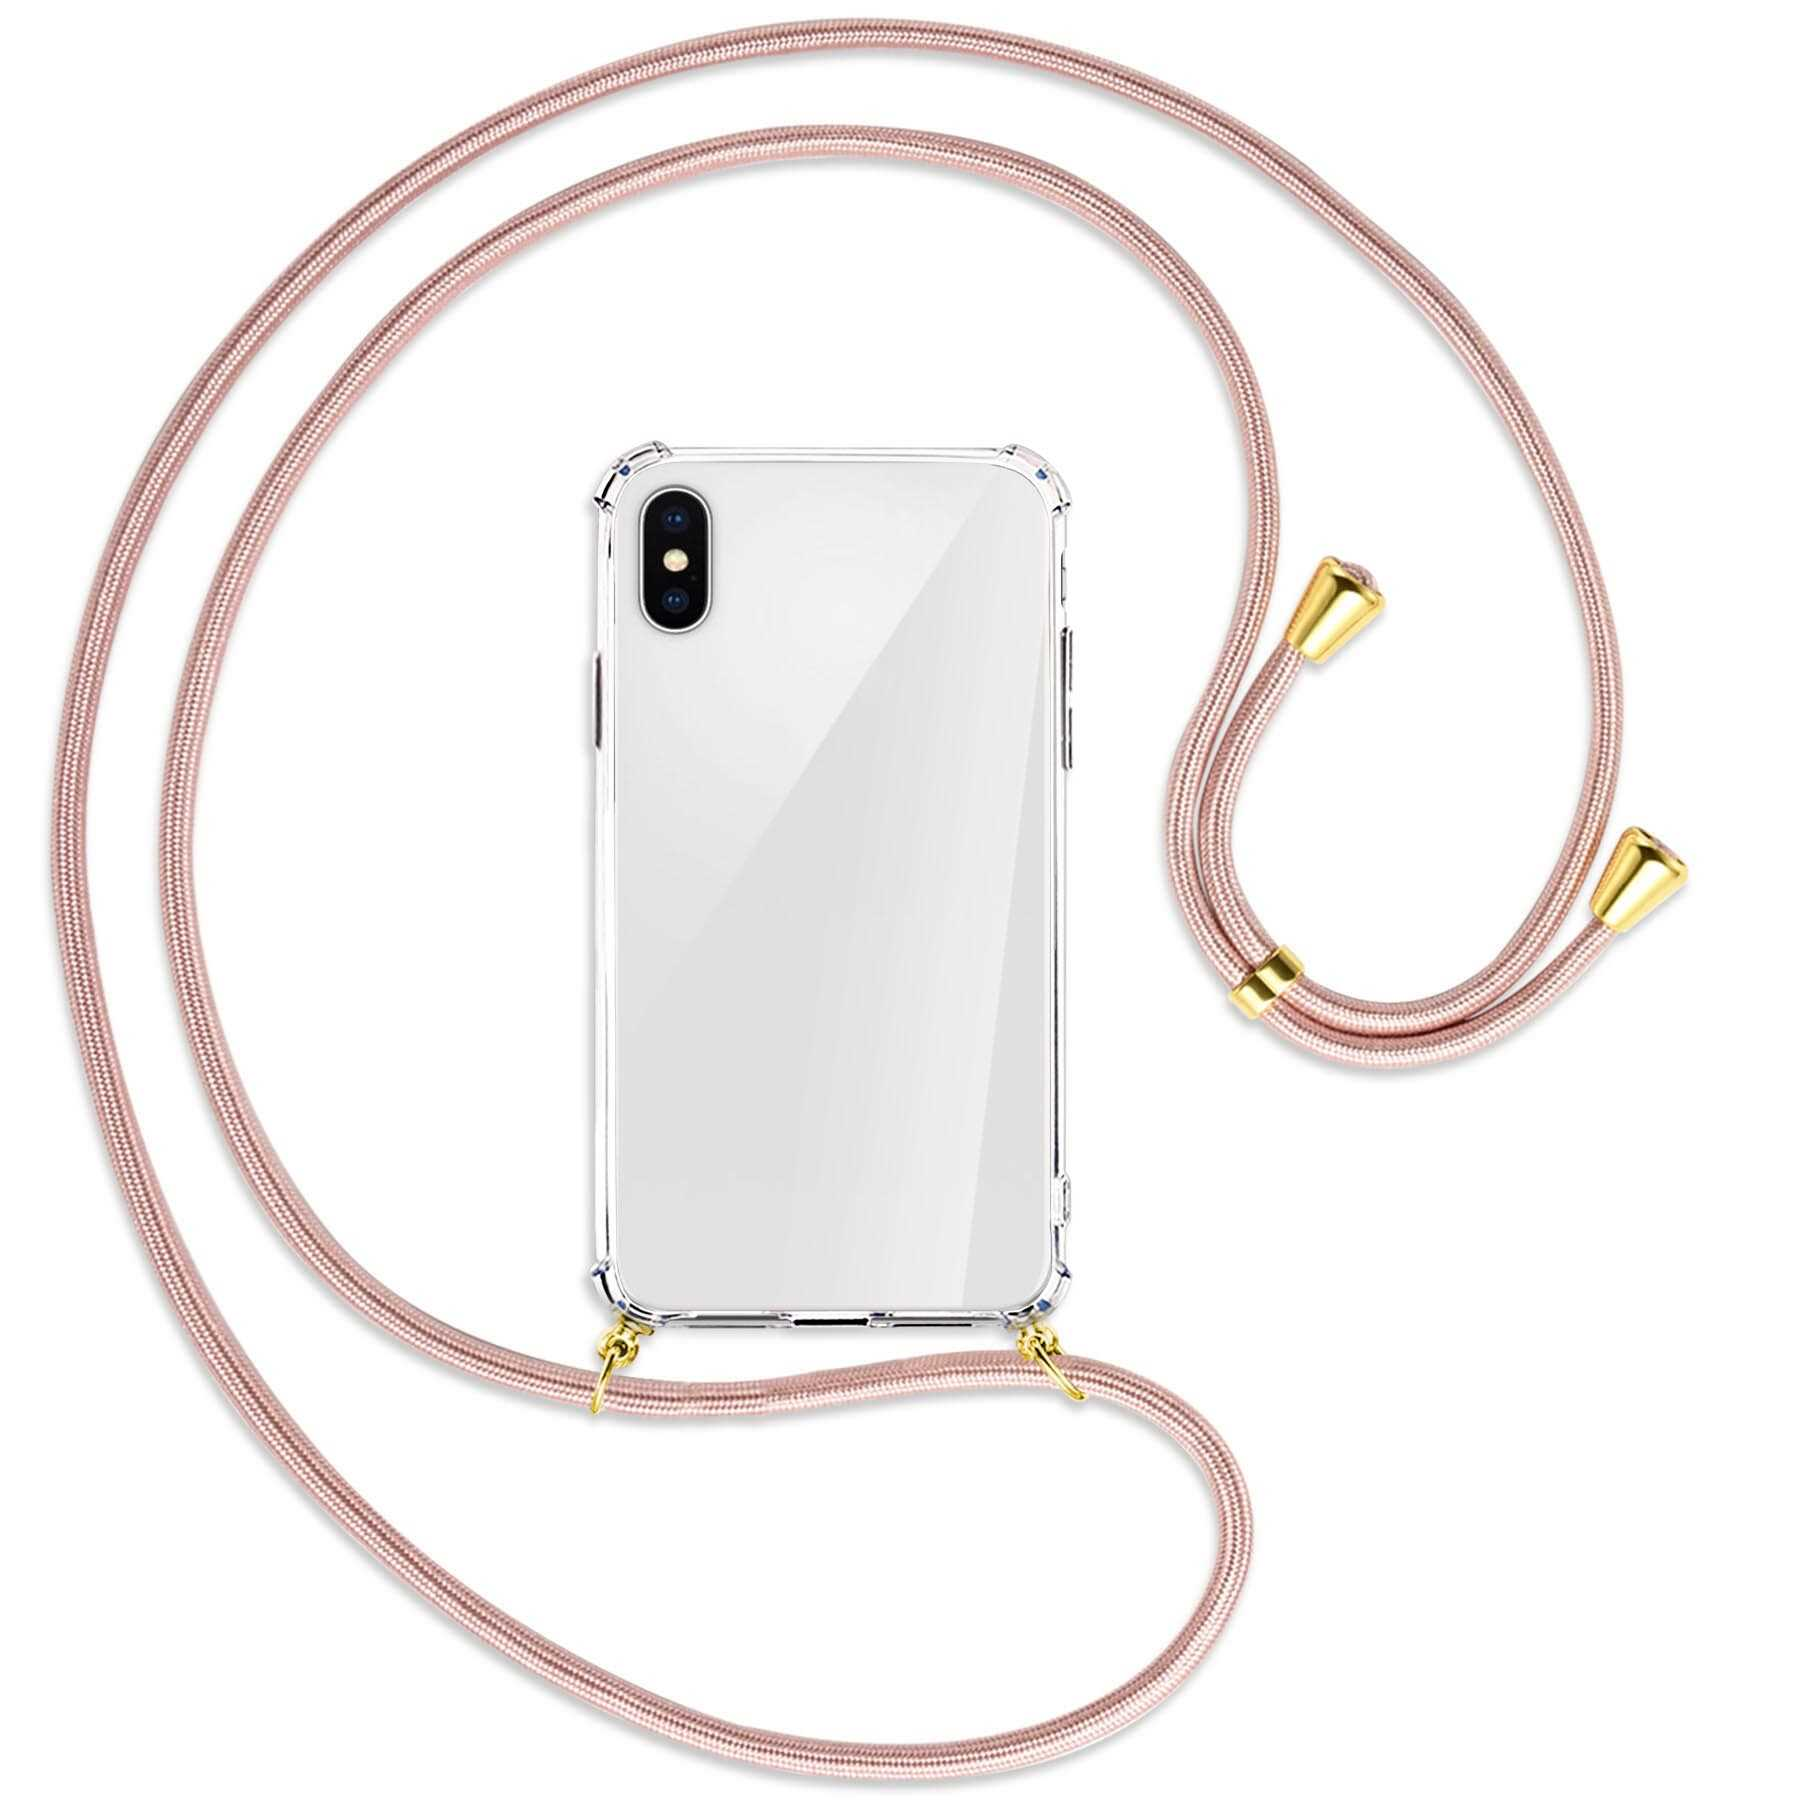 iPhone ENERGY / Umhänge-Hülle Kordel, Gold mit Apple, iPhone iPhone X, Rosegold 10, MTB MORE XS, Backcover,